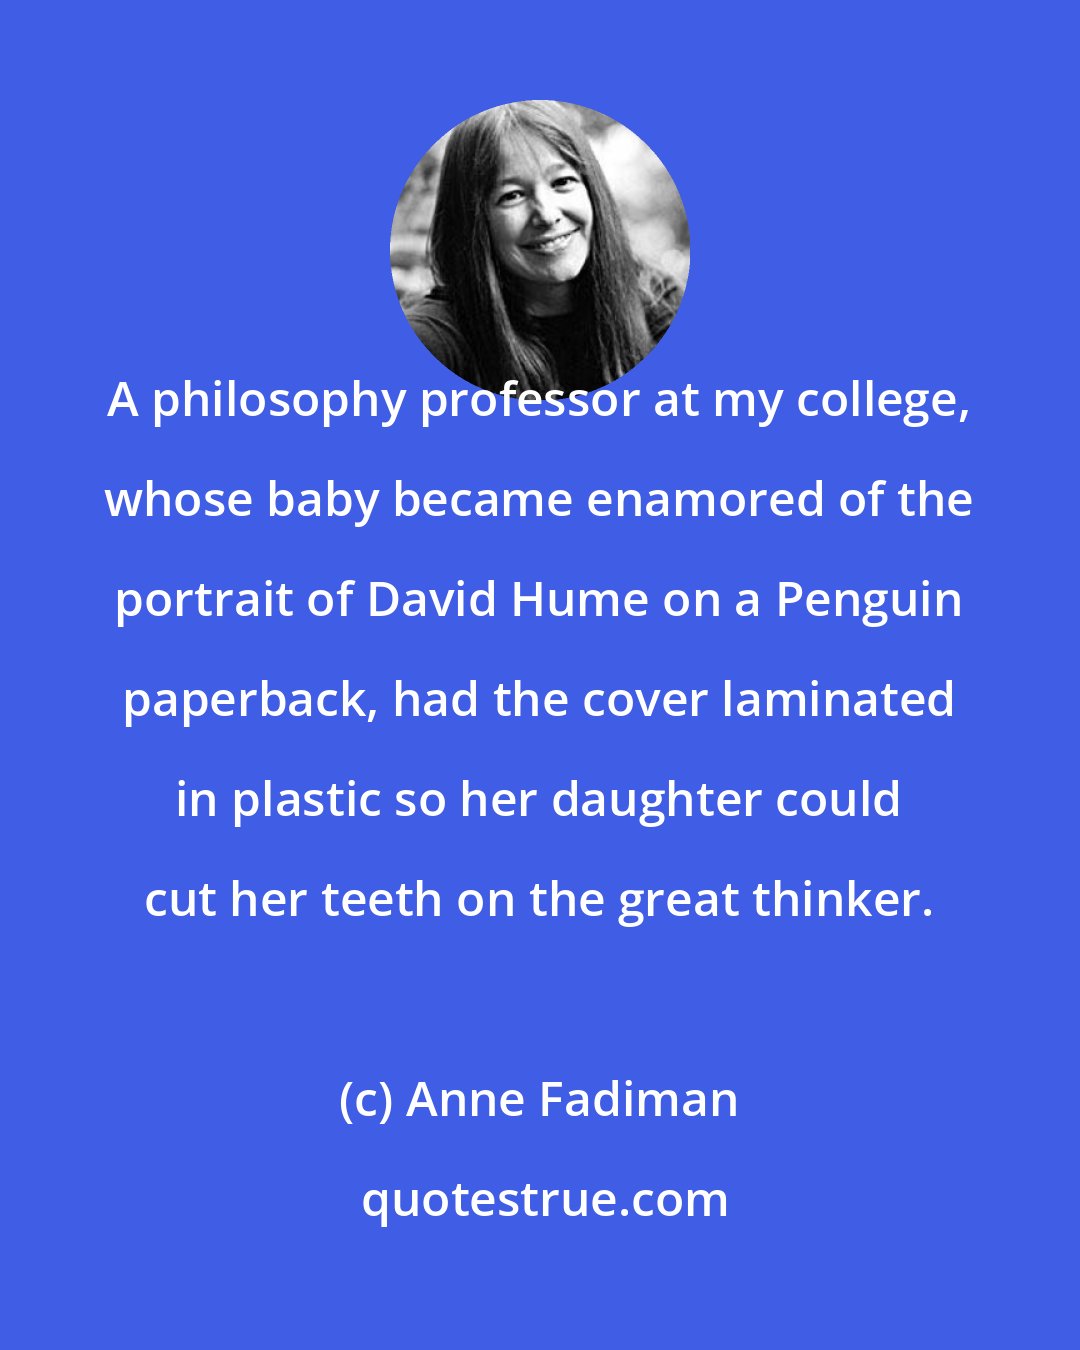 Anne Fadiman: A philosophy professor at my college, whose baby became enamored of the portrait of David Hume on a Penguin paperback, had the cover laminated in plastic so her daughter could cut her teeth on the great thinker.